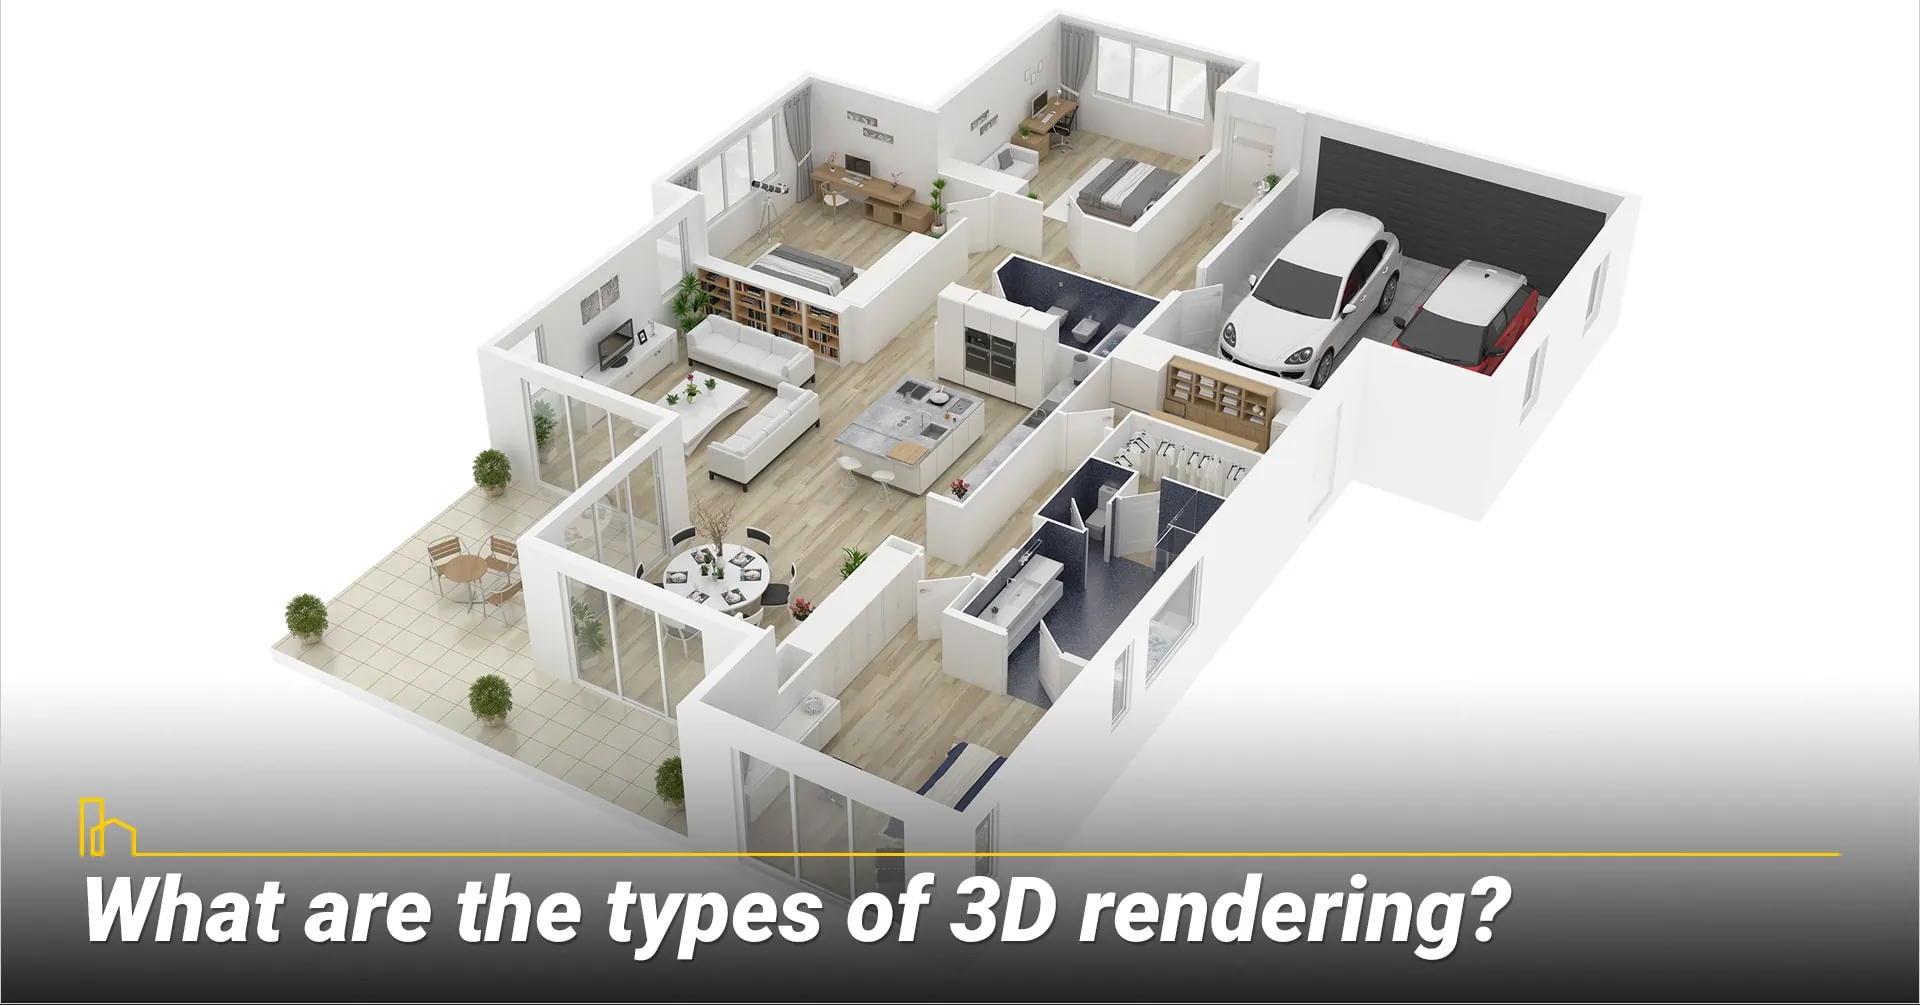 What are the types of 3D rendering?